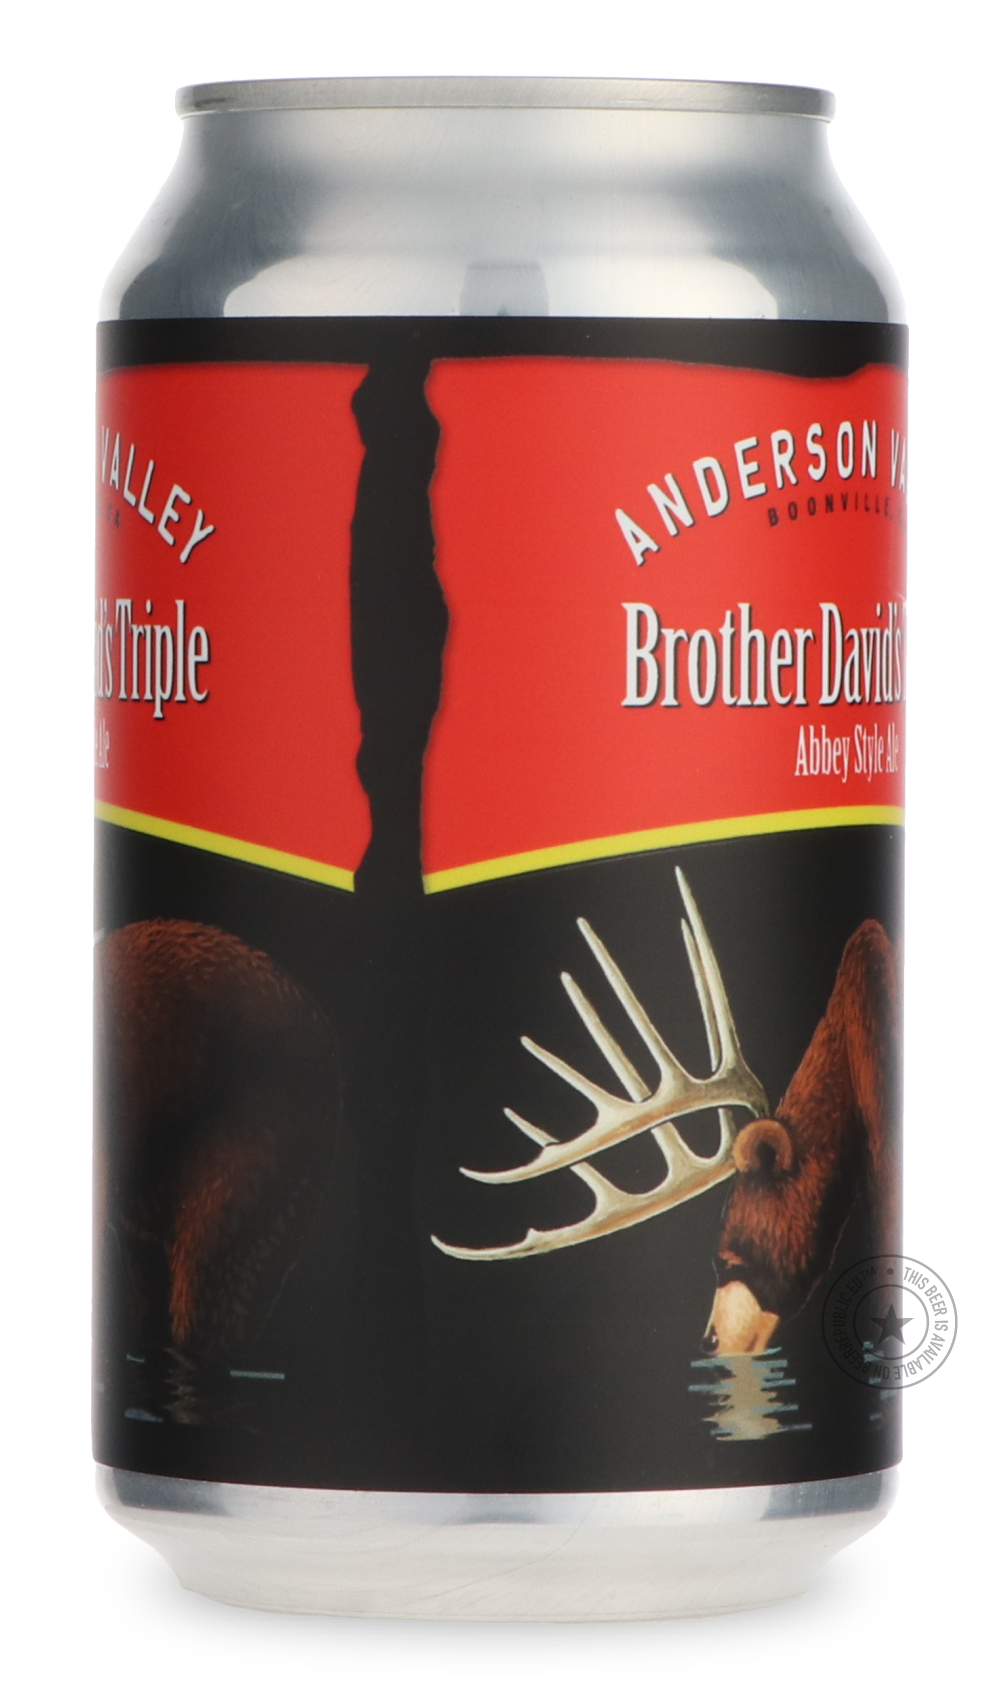 -Anderson Valley- Brother David's Triple-Pale- Only @ Beer Republic - The best online beer store for American & Canadian craft beer - Buy beer online from the USA and Canada - Bier online kopen - Amerikaans bier kopen - Craft beer store - Craft beer kopen - Amerikanisch bier kaufen - Bier online kaufen - Acheter biere online - IPA - Stout - Porter - New England IPA - Hazy IPA - Imperial Stout - Barrel Aged - Barrel Aged Imperial Stout - Brown - Dark beer - Blond - Blonde - Pilsner - Lager - Wheat - Weizen -